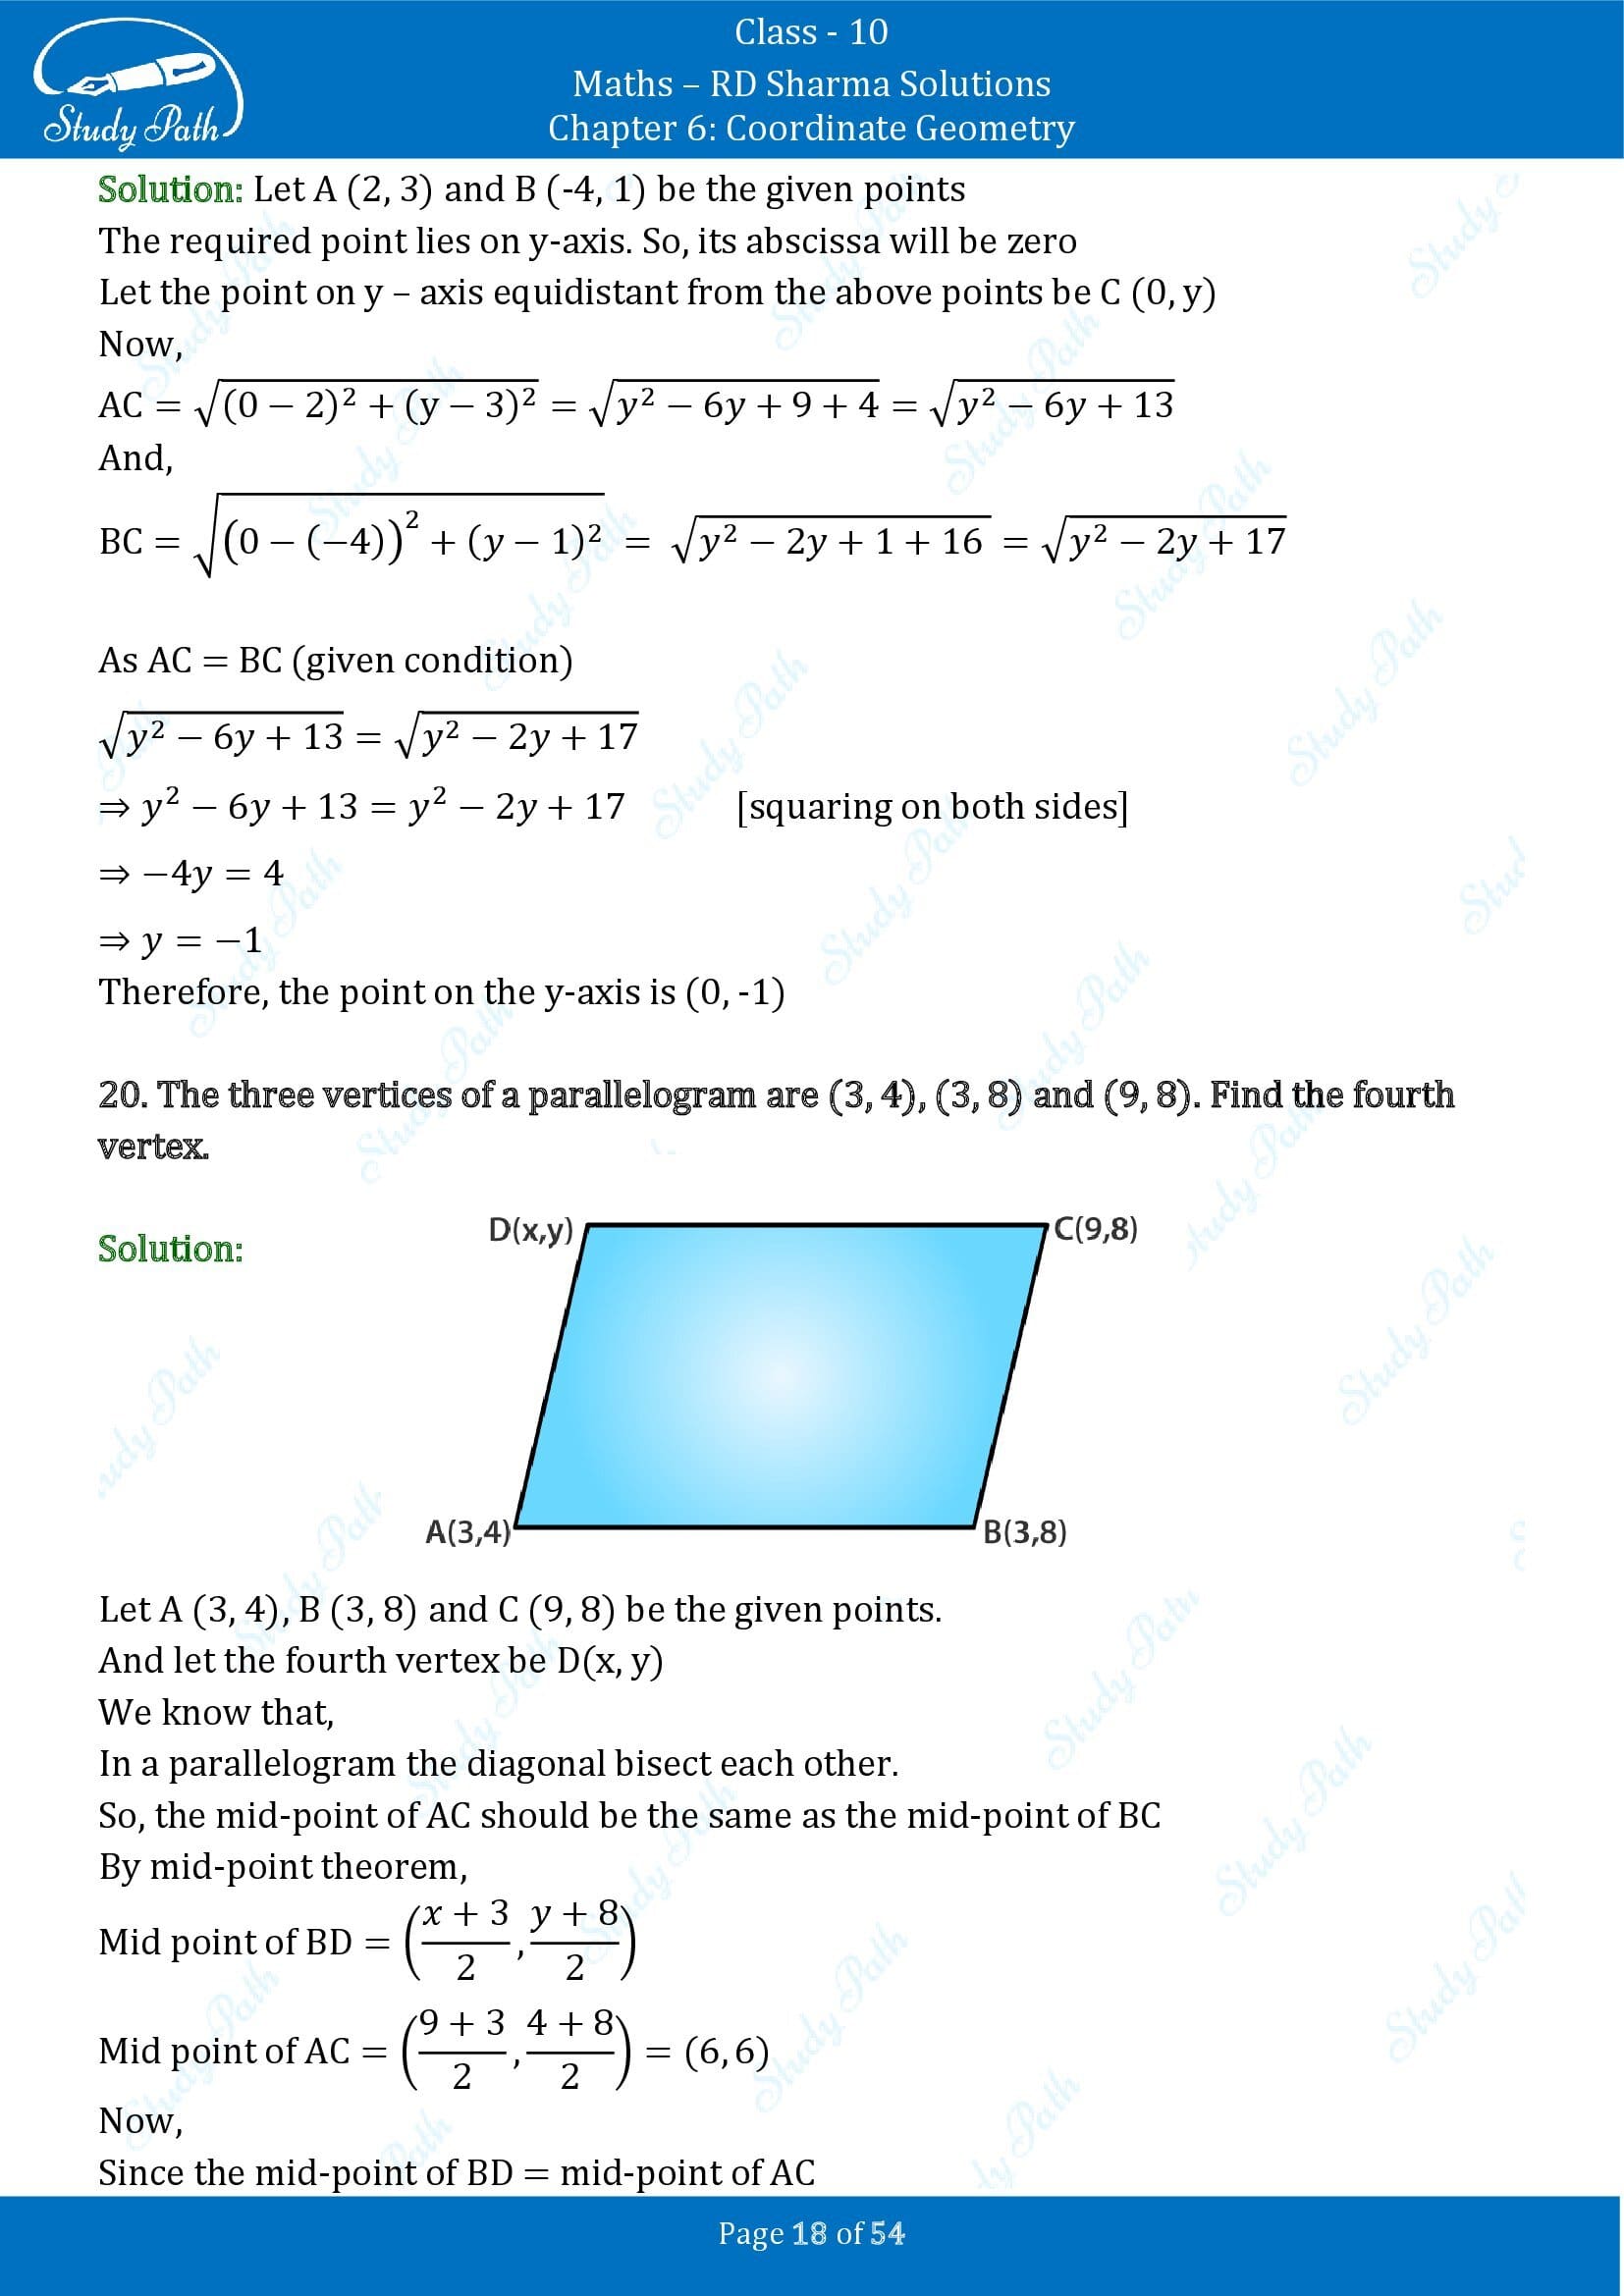 RD Sharma Solutions Class 10 Chapter 6 Coordinate Geometry Exercise 6.2 0018